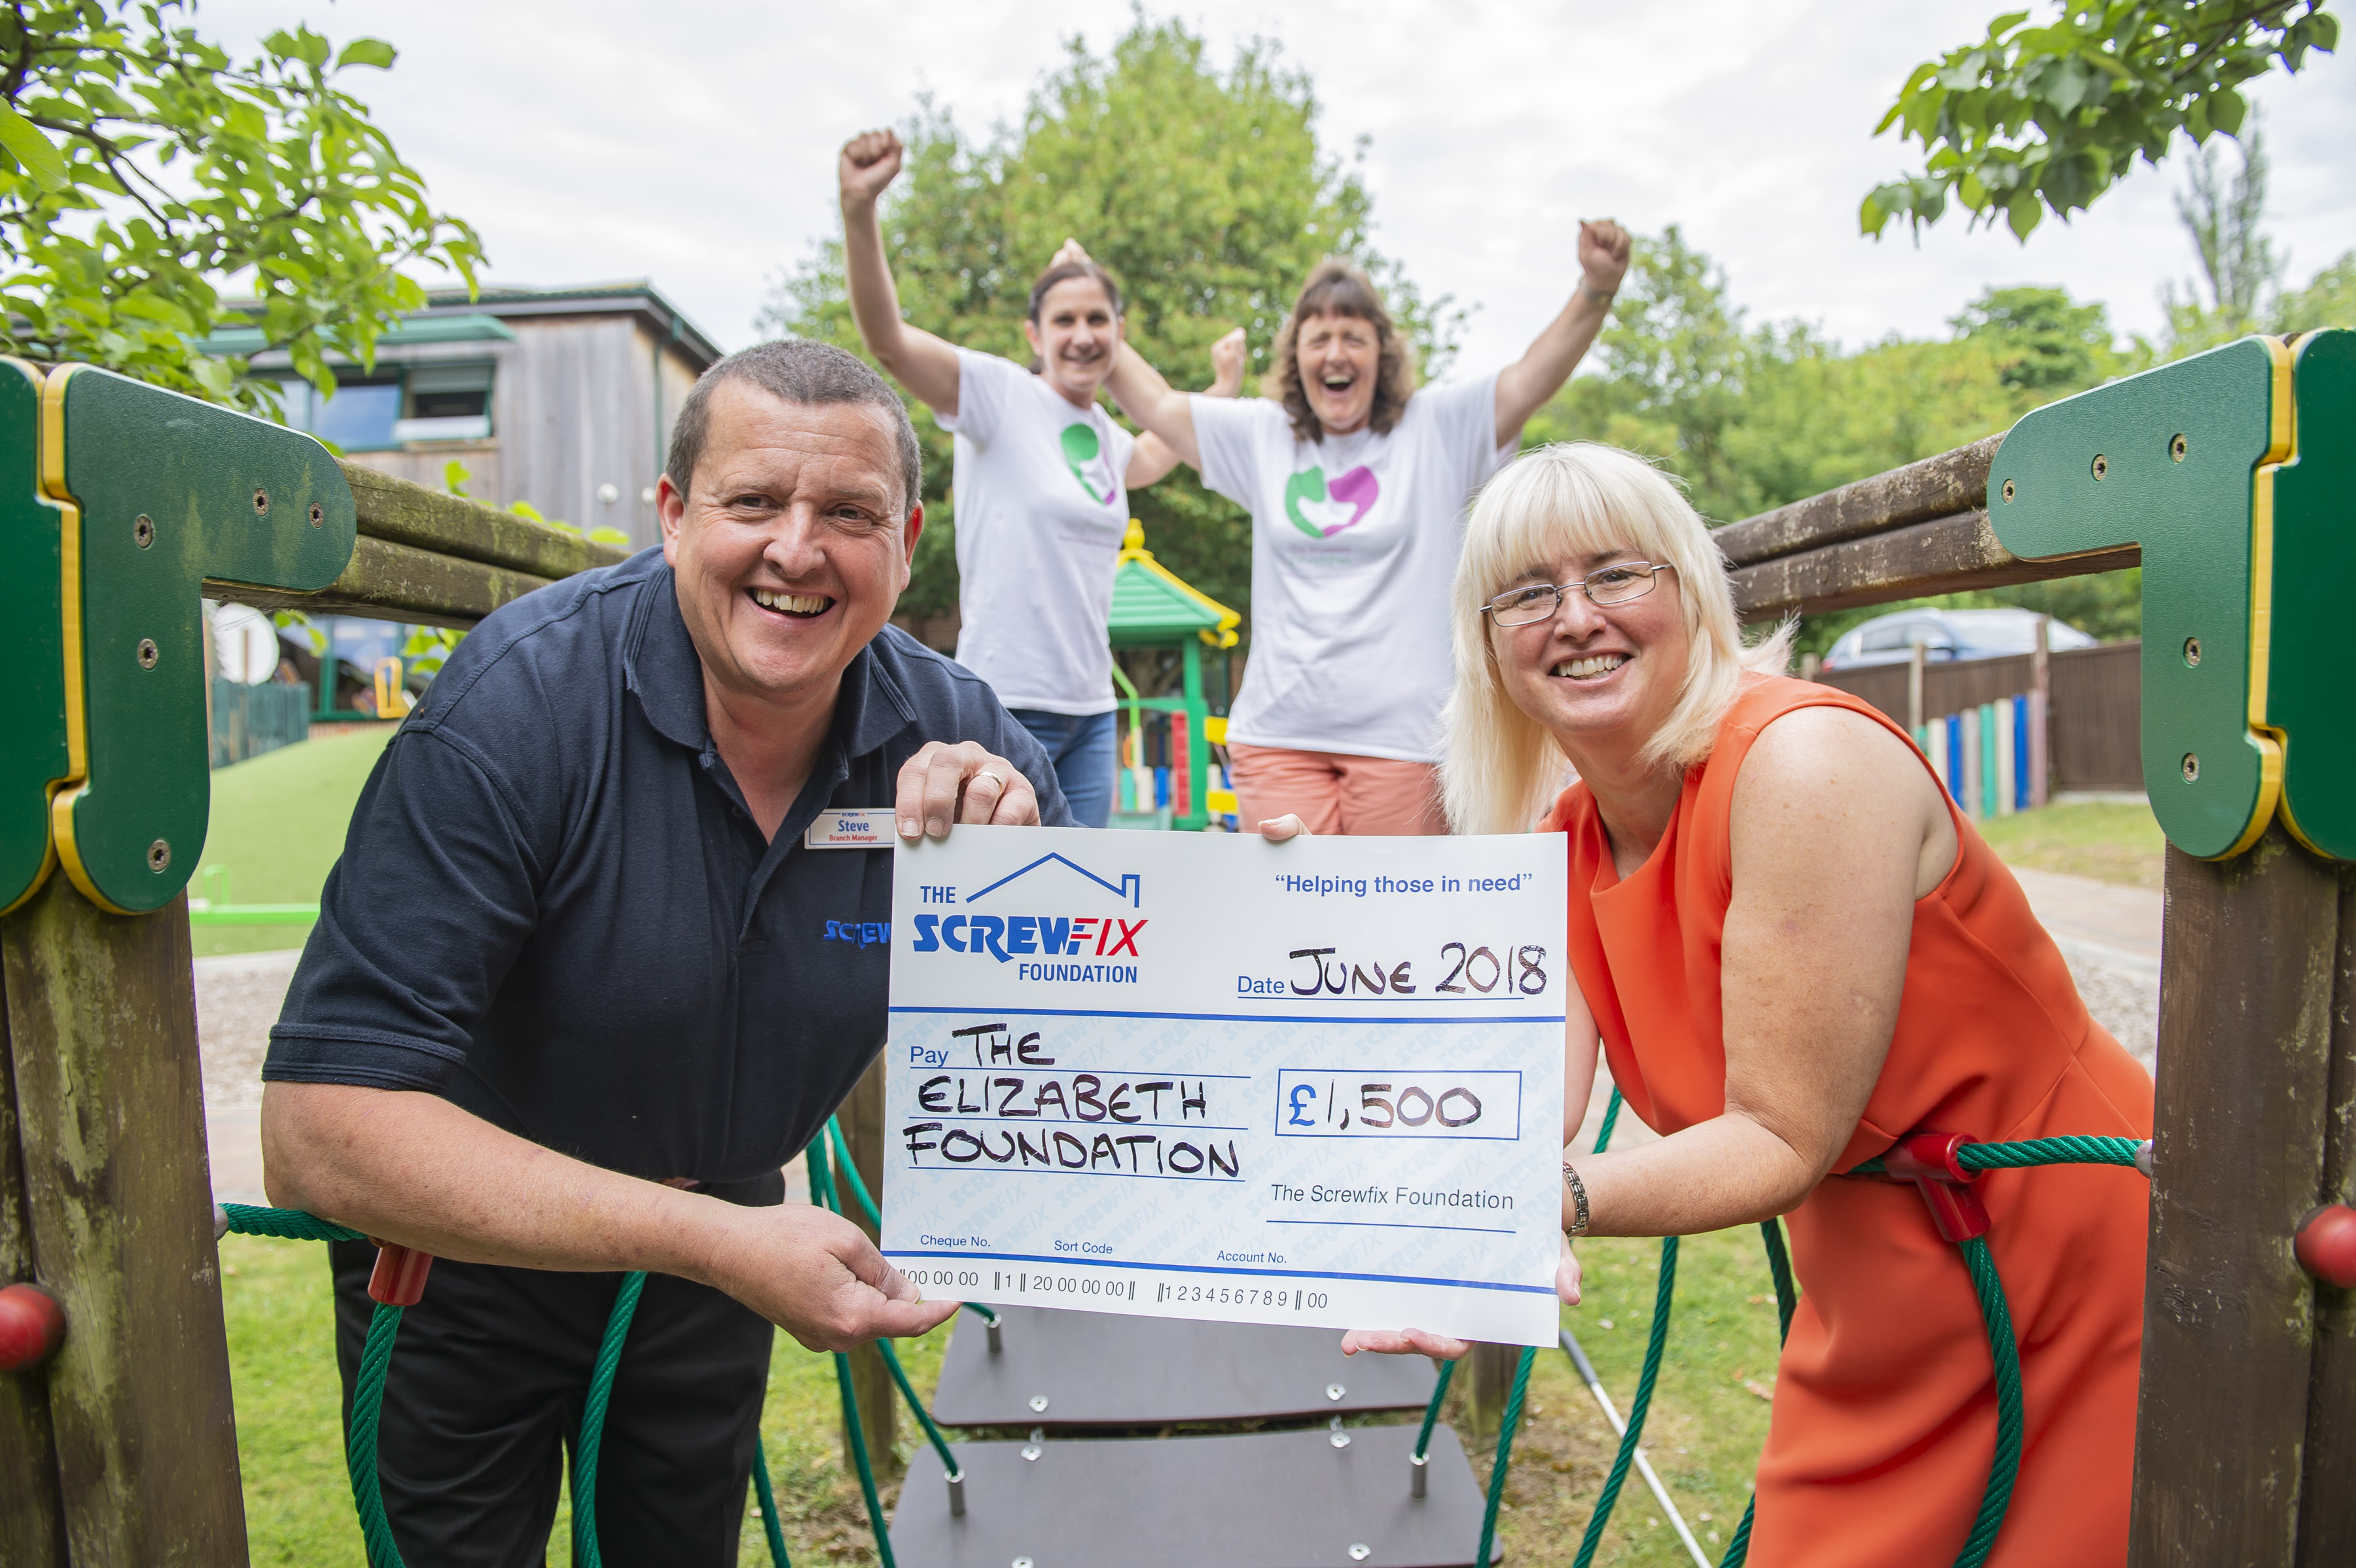 The Elizabeth Foundation gets a helping hand from the Screwfix Foundation